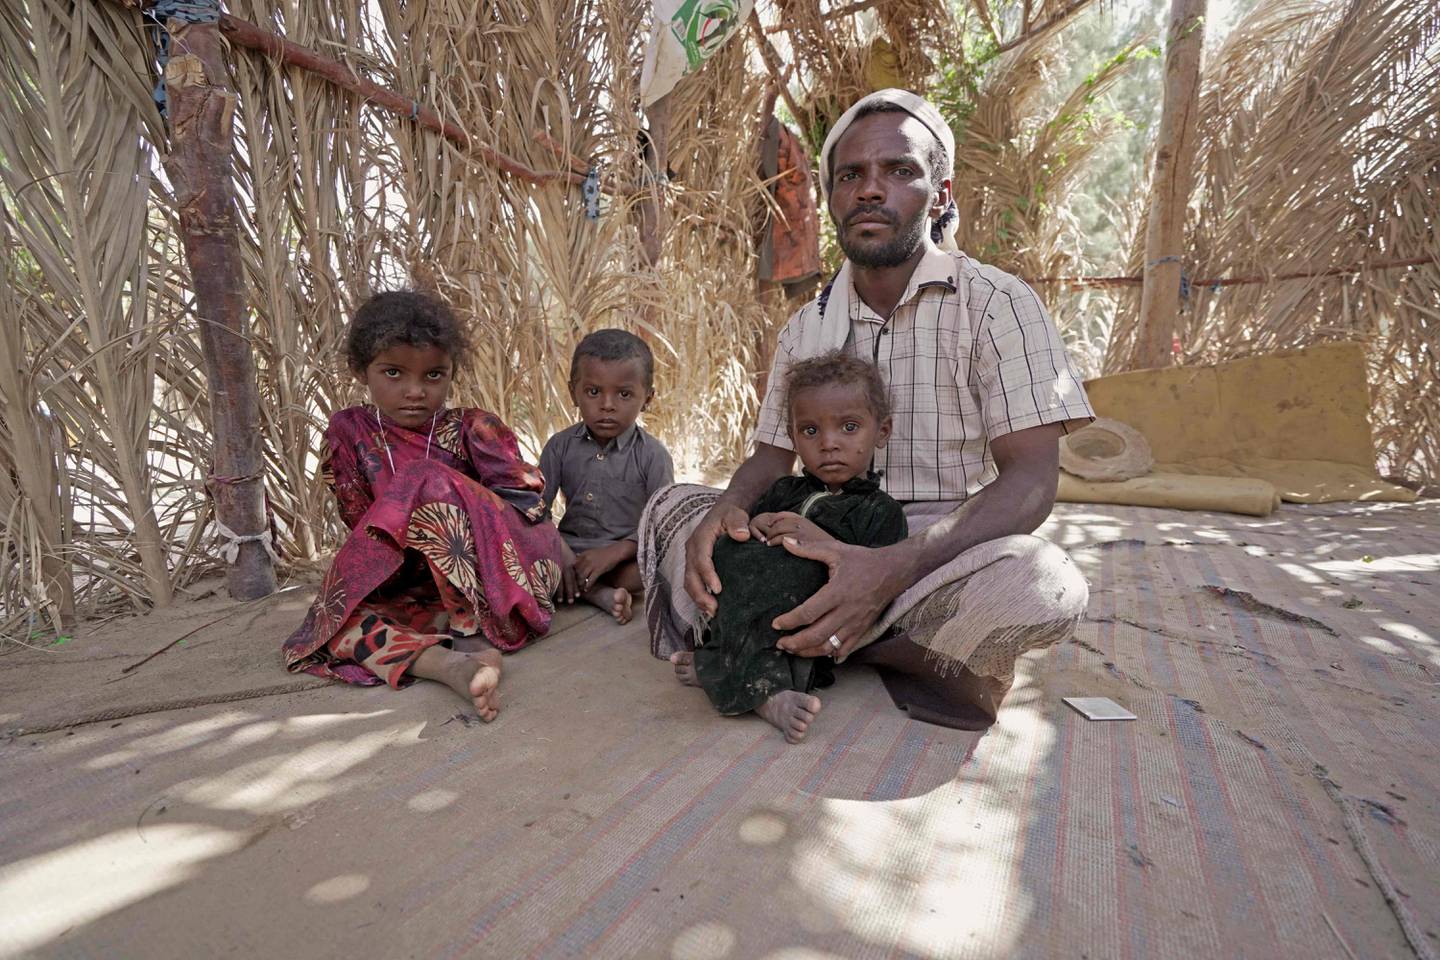 Yehya Hayba and his children, who fled fighting between Huthi rebels and the Saudi-backed government forces, at the Al Sumya camp.